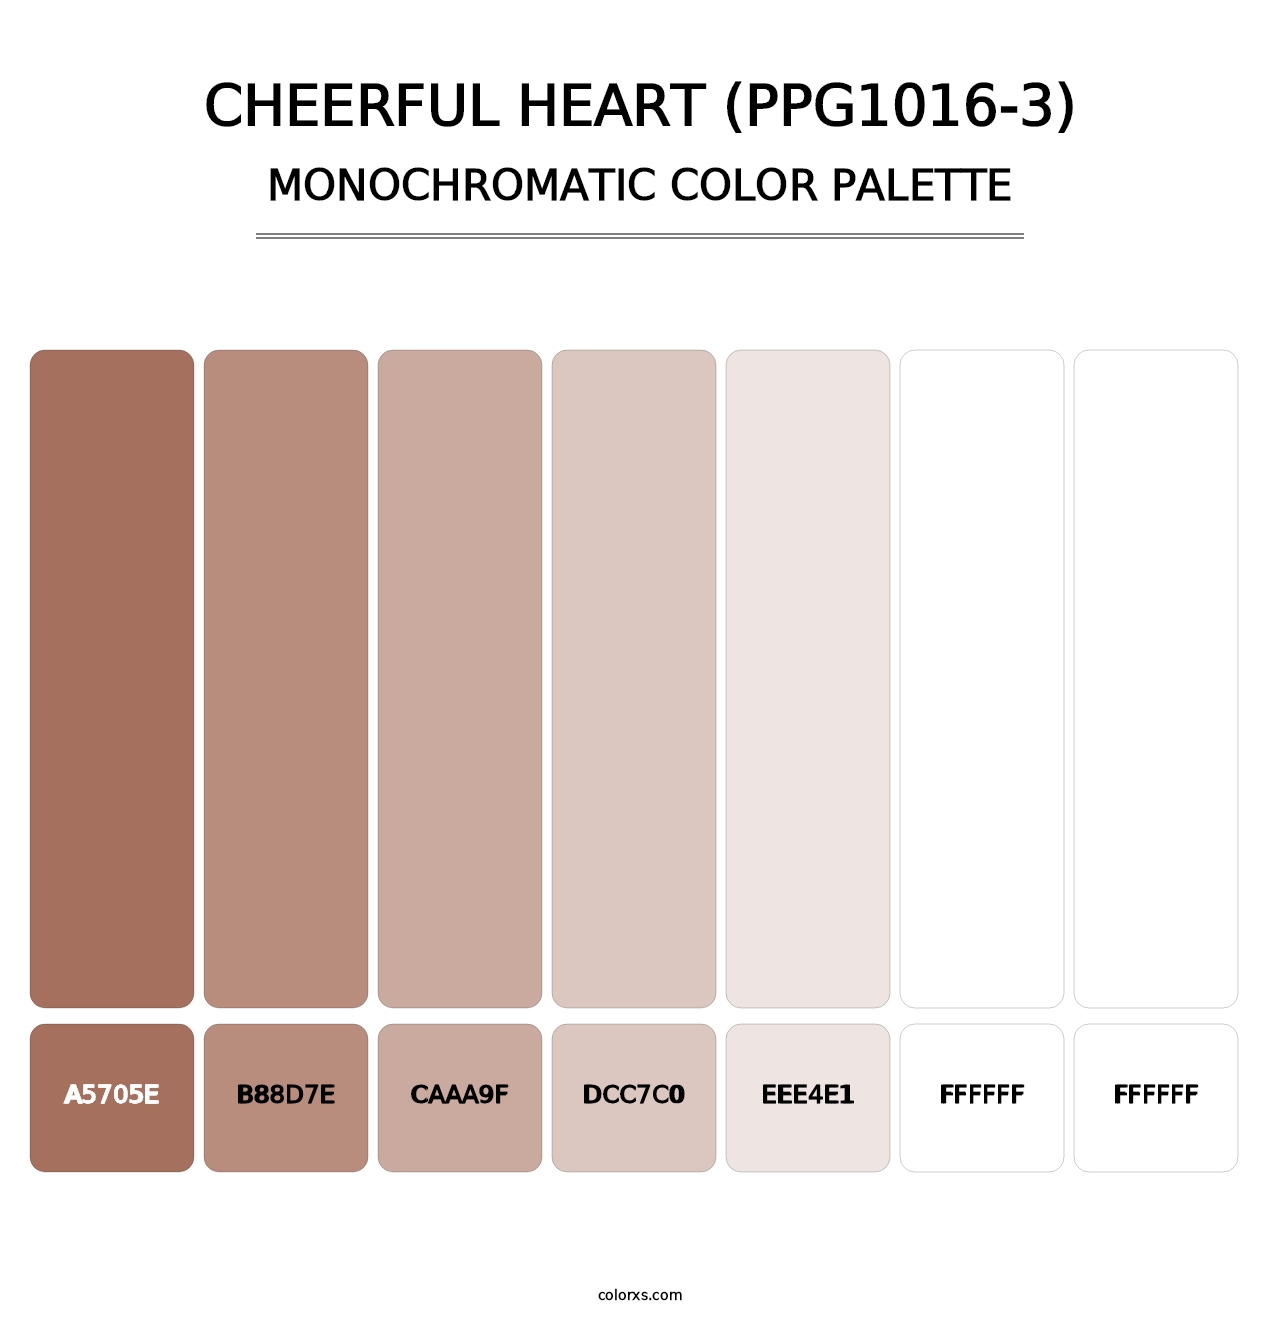 Cheerful Heart (PPG1016-3) - Monochromatic Color Palette